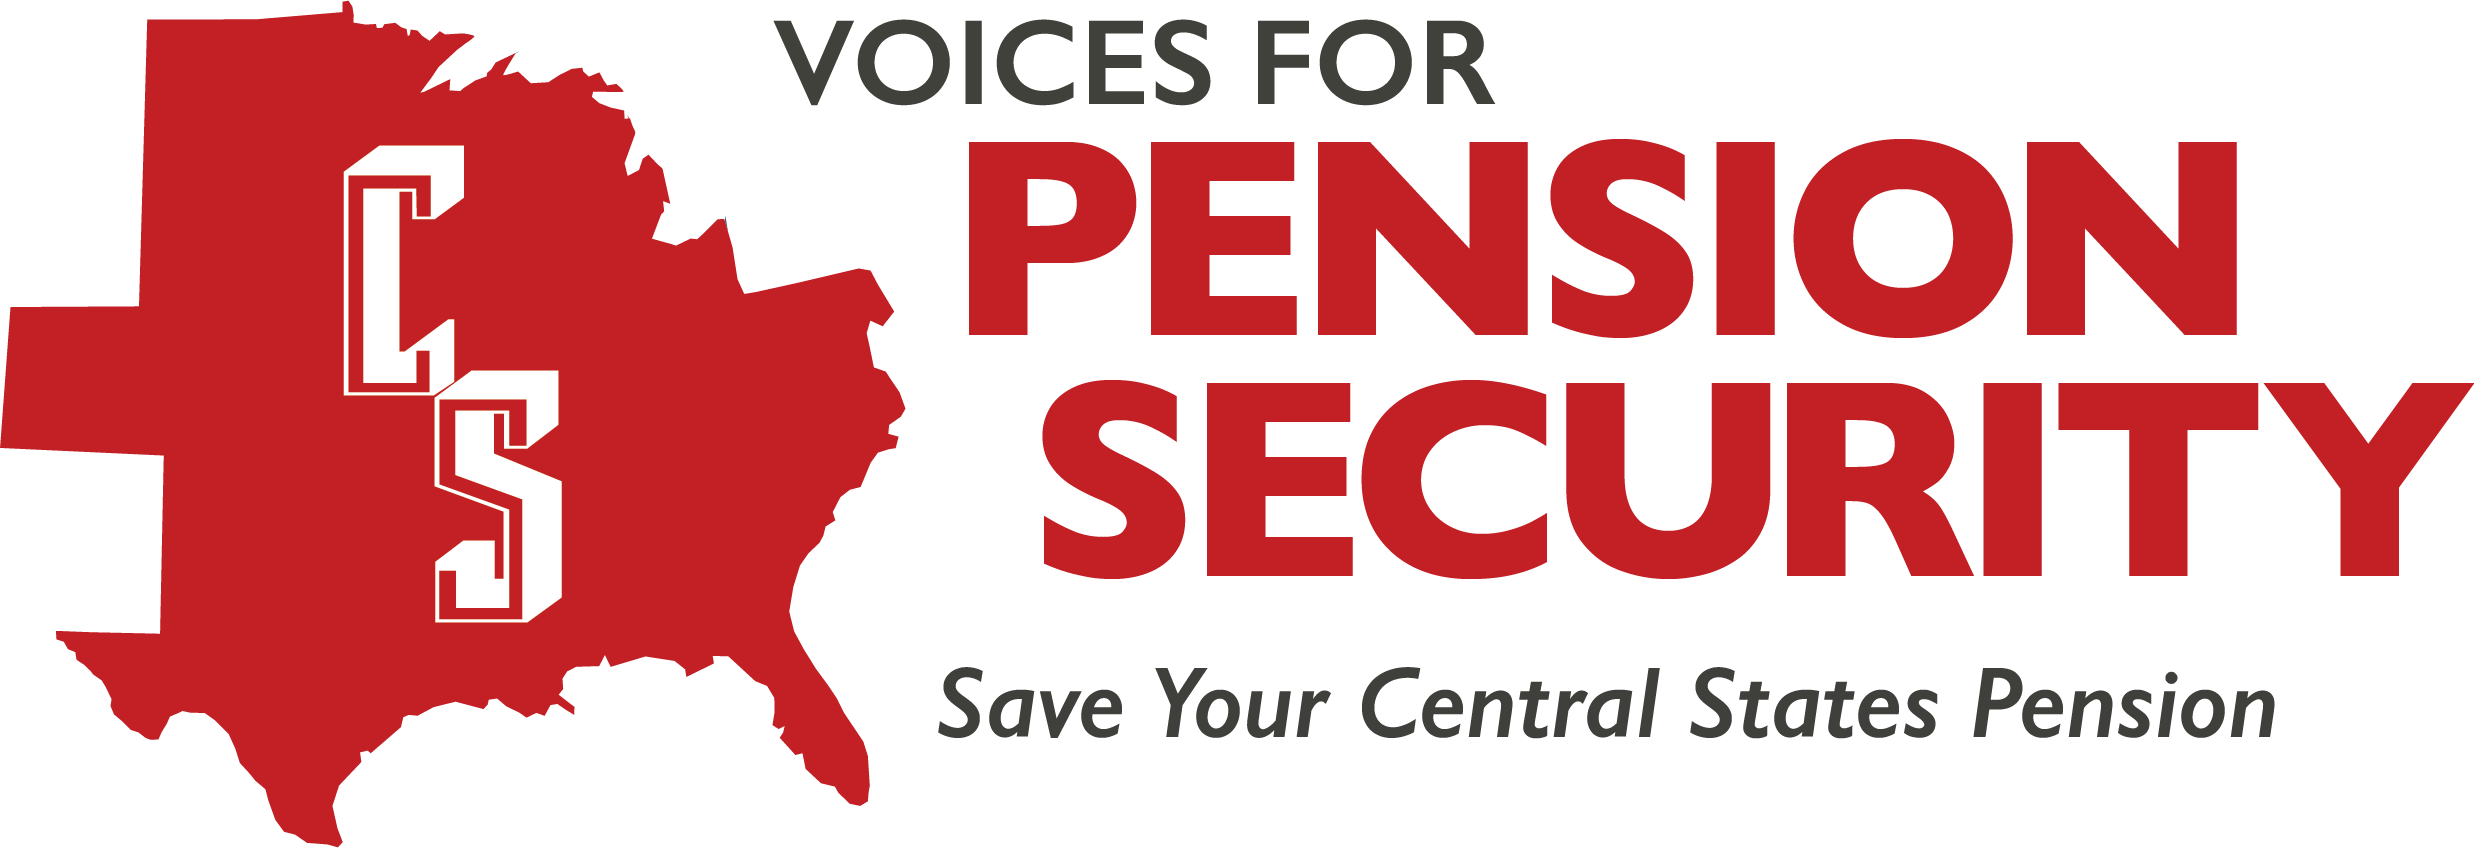 Voices for Pension Security